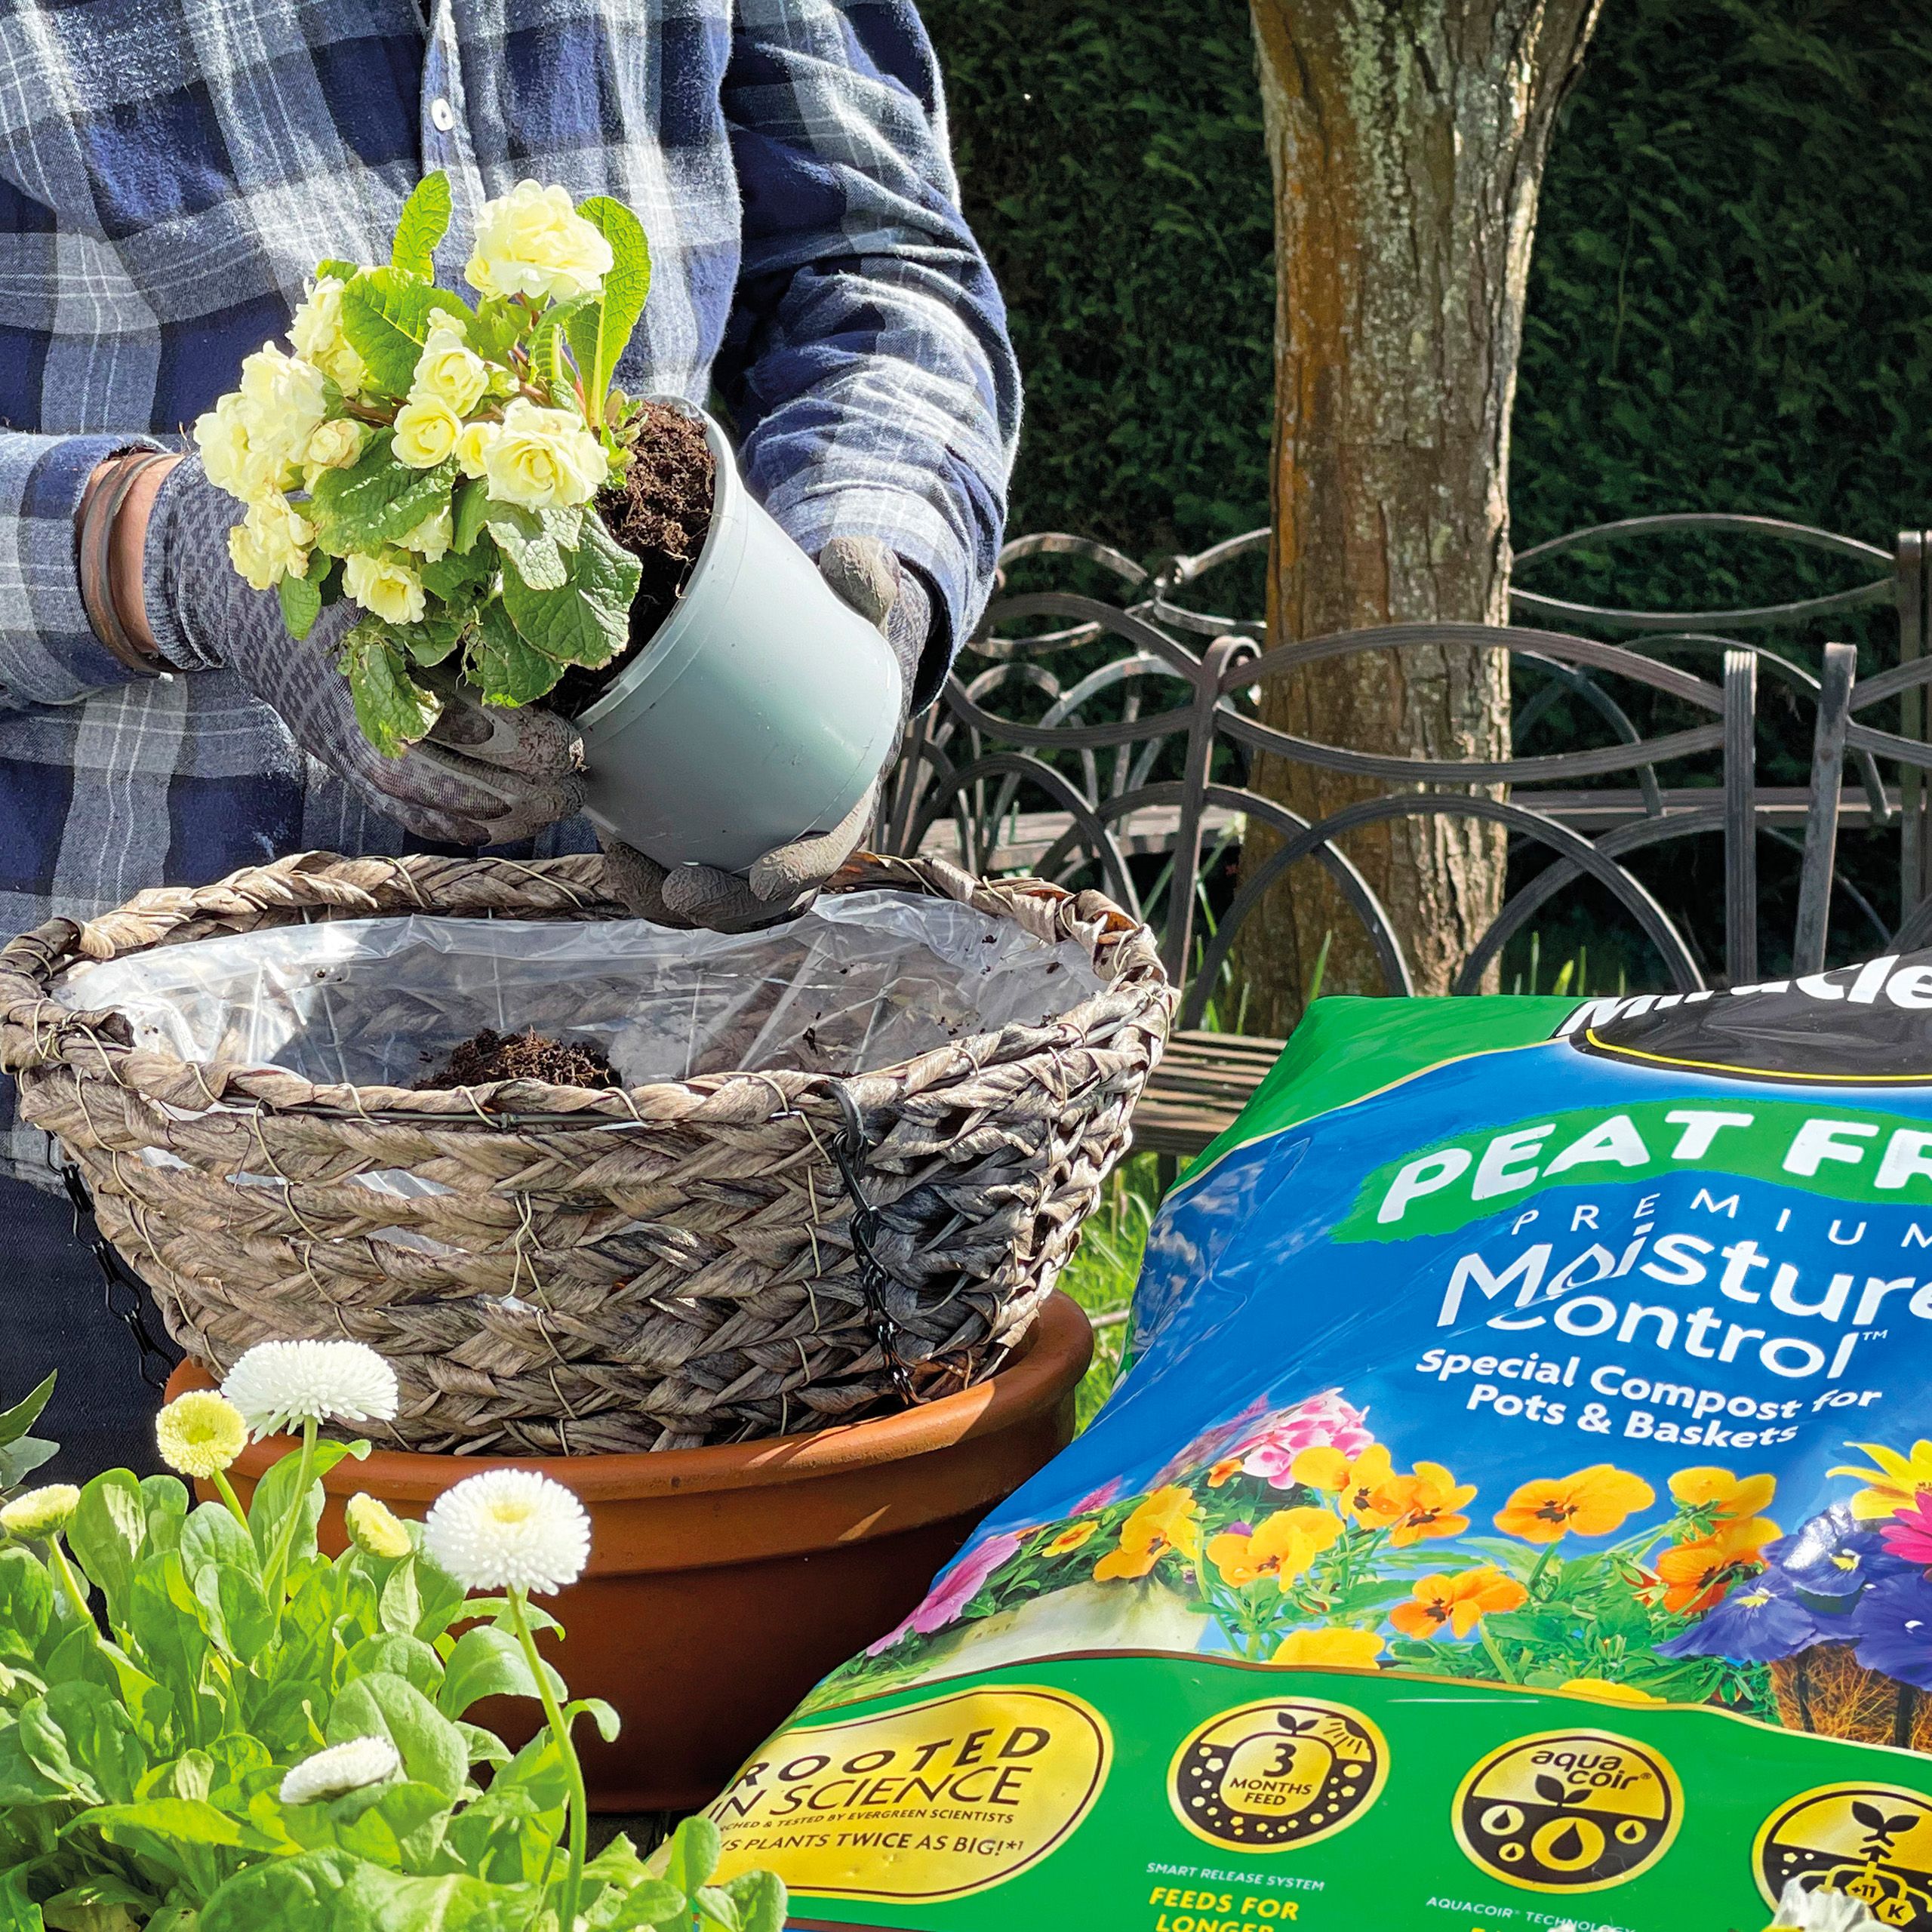 https://media.diy.com/is/image/Kingfisher/miracle-gro-moisture-control-beds-borders-pots-compost-40l-bag~5010272190564_02i?$MOB_PREV$&$width=618&$height=618